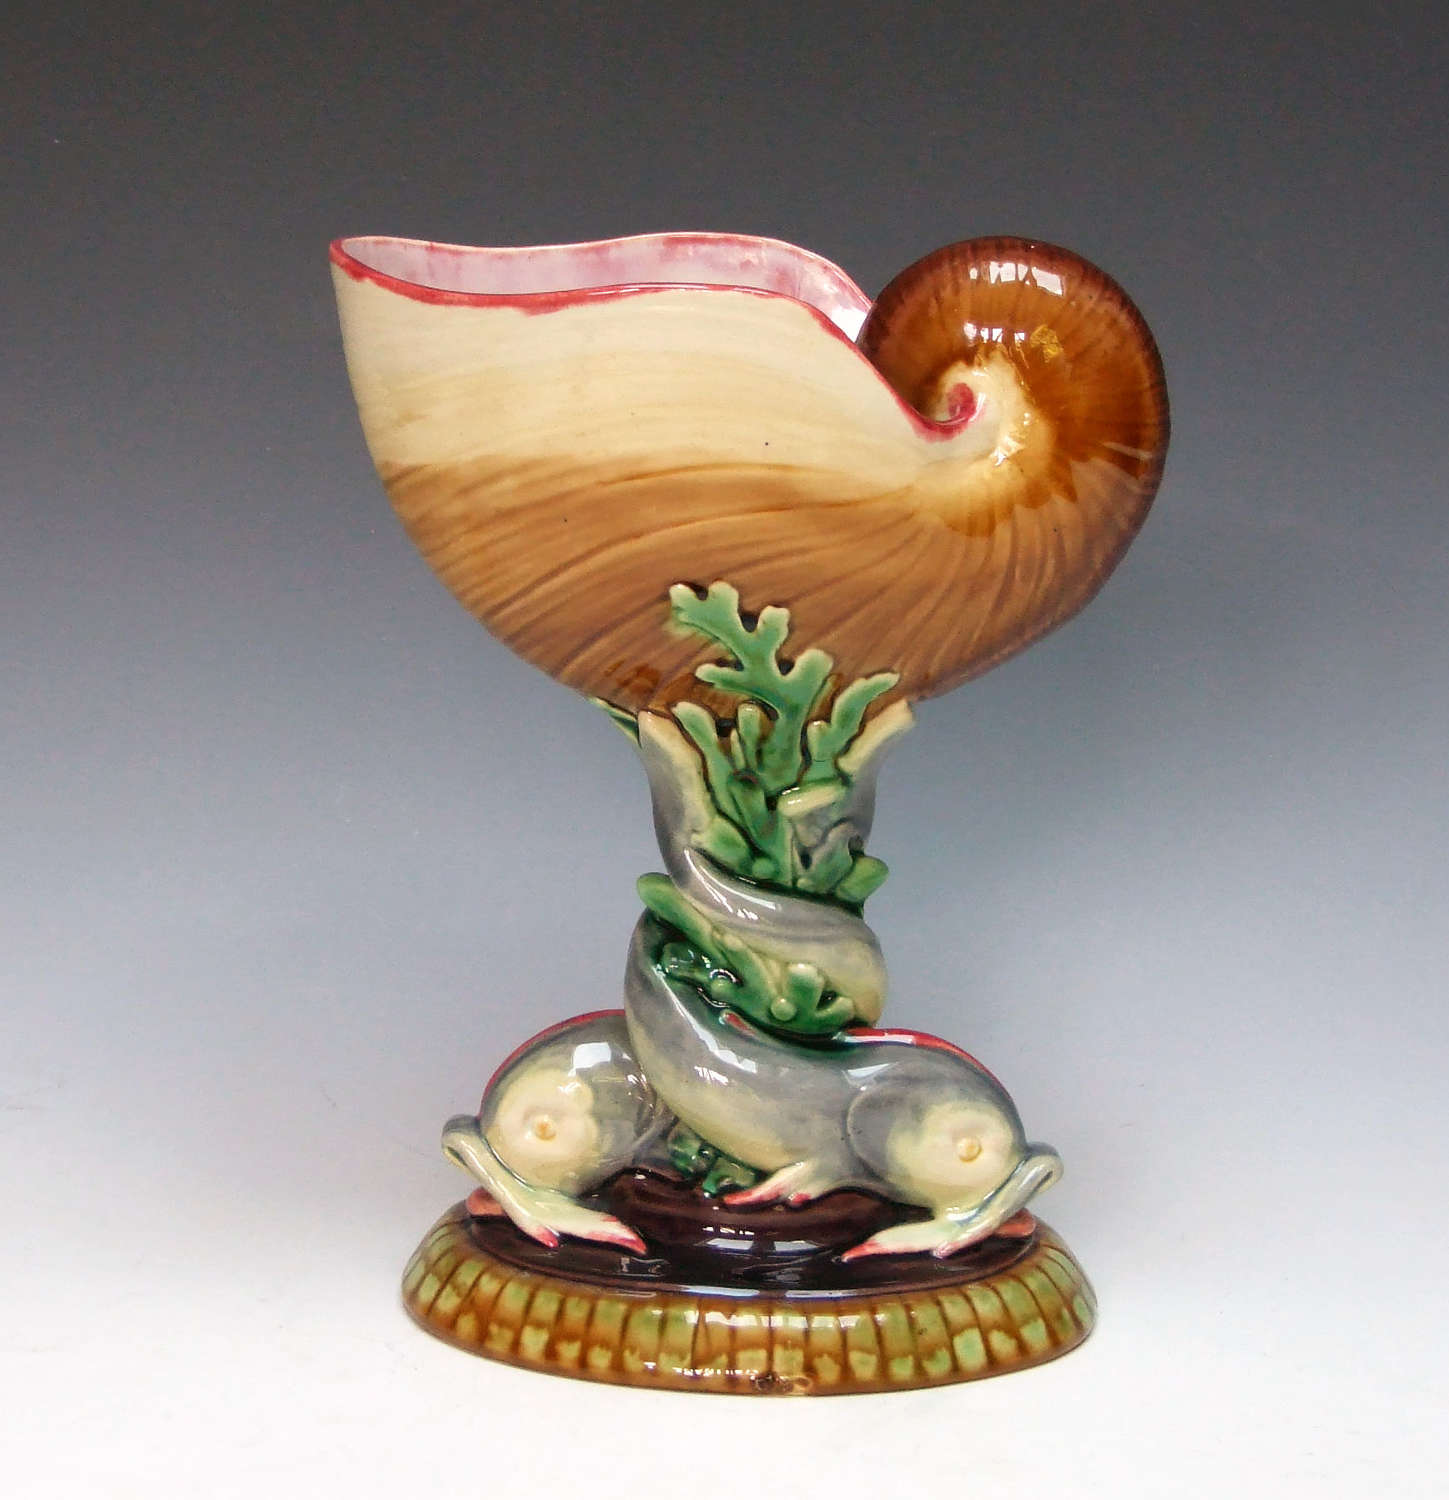 A beautiful Minton majolica nautilus shell and dolphin coupe.